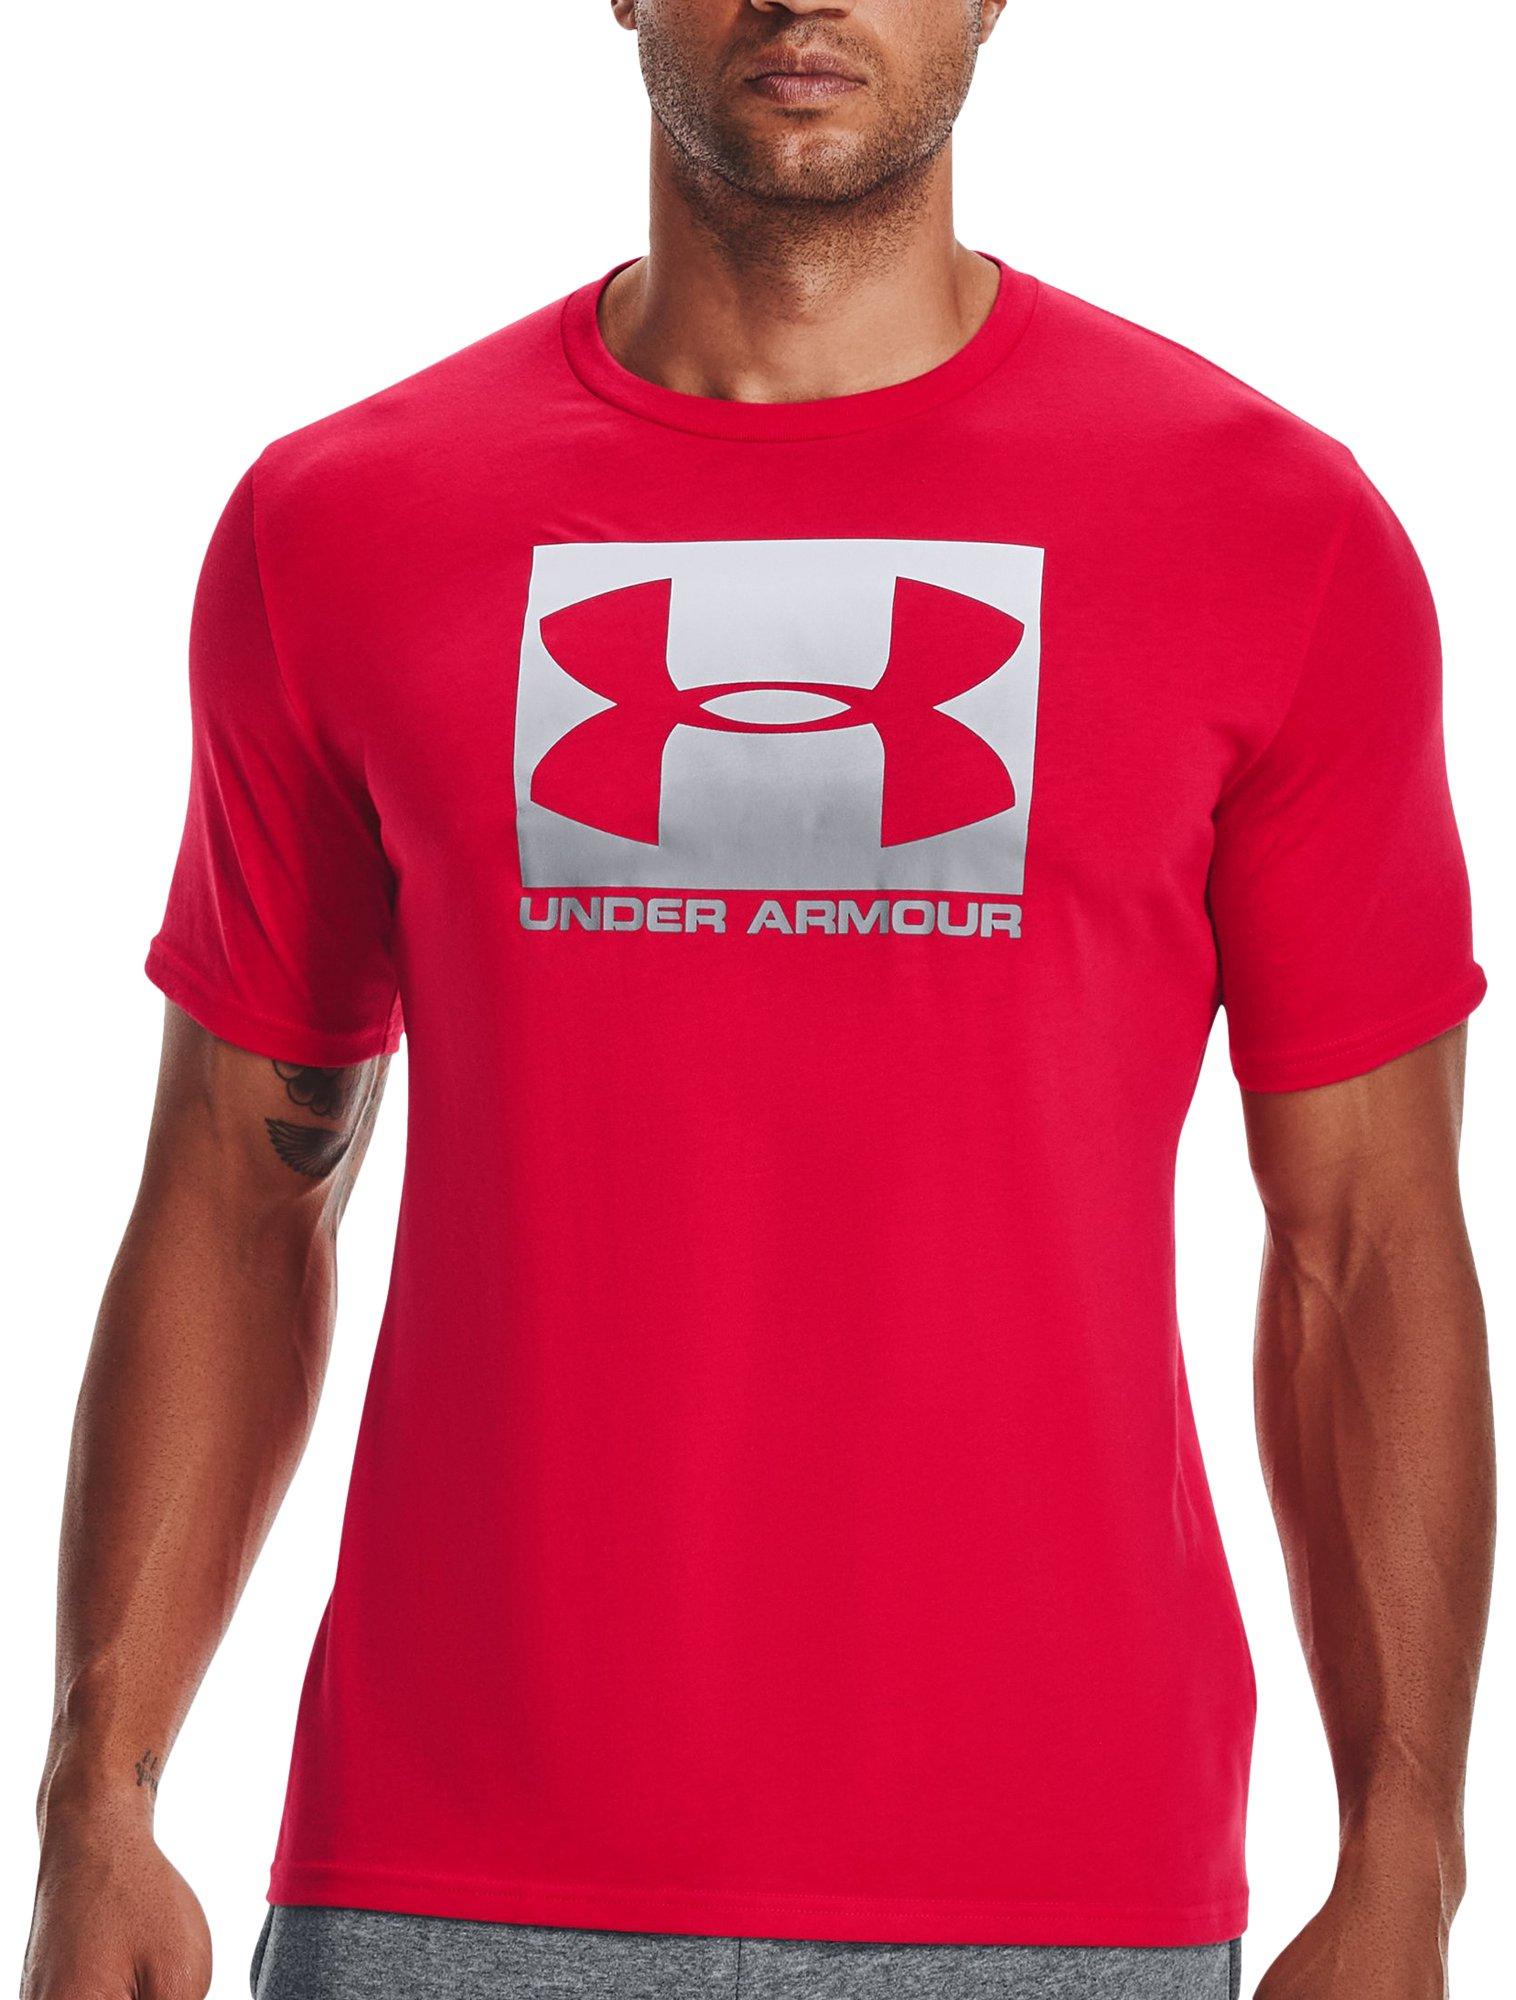 Under Armour Mens Sports Style Short Sleeve T-Shirt